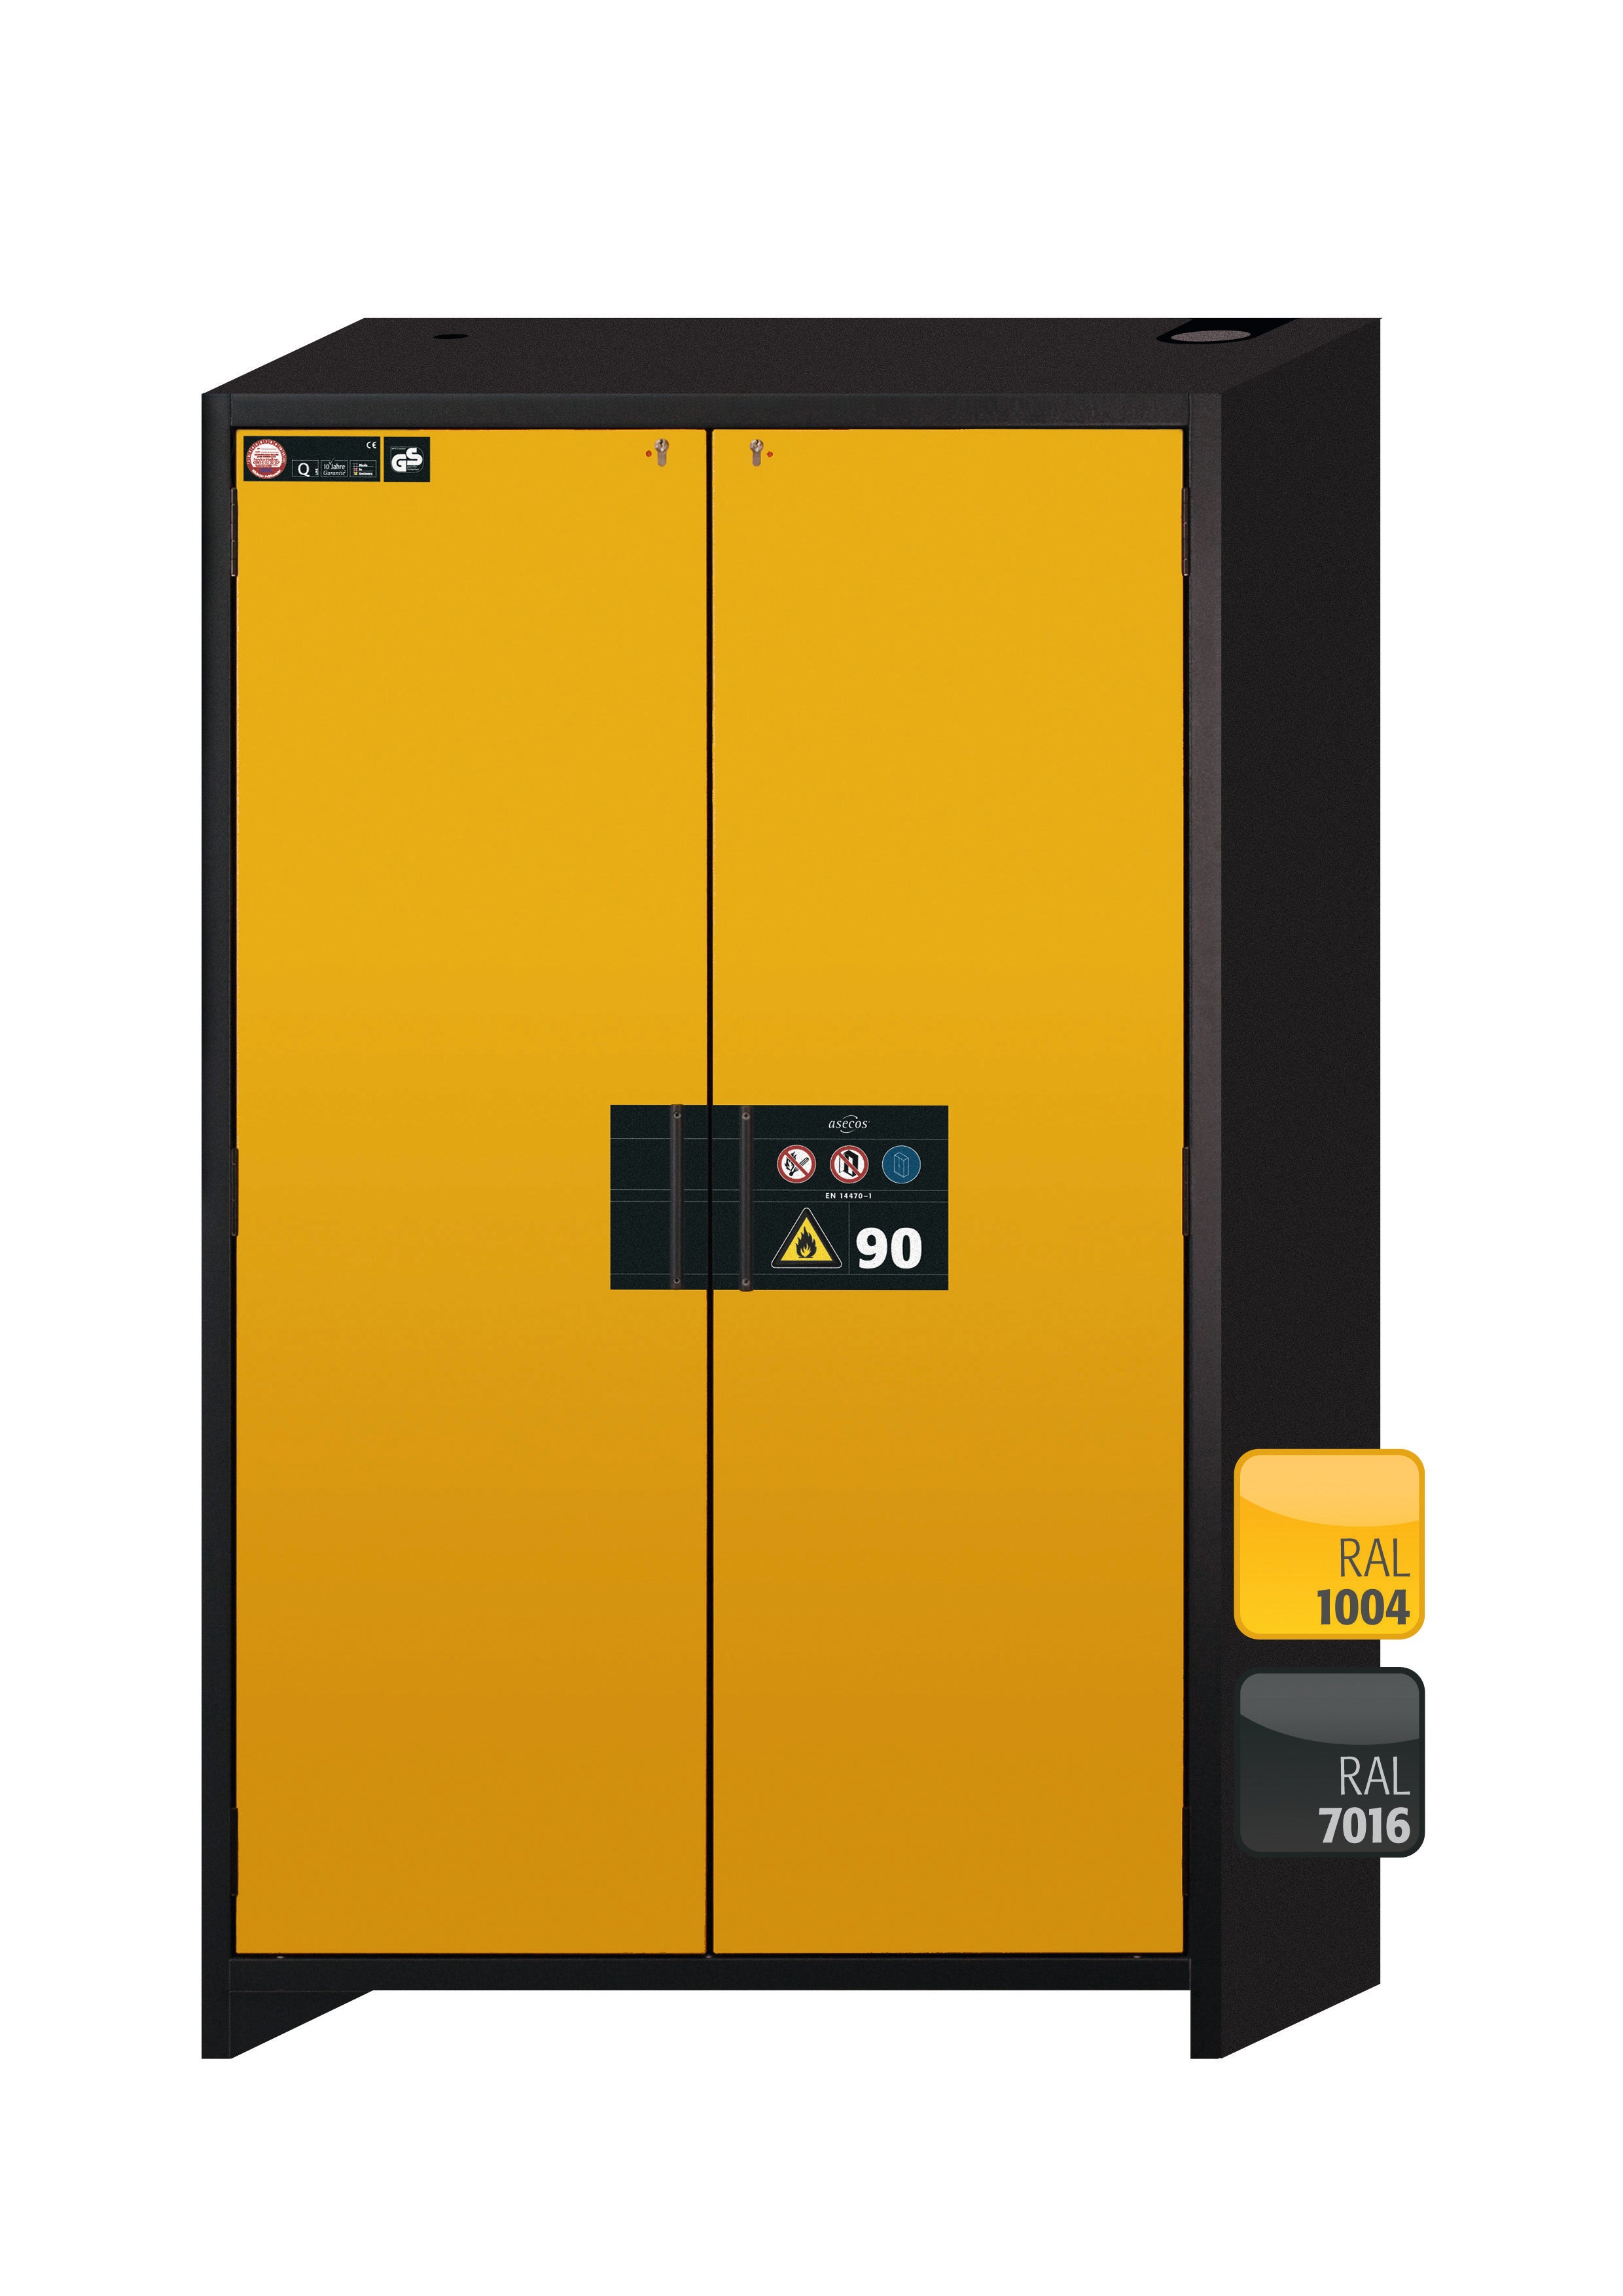 Type 90 safety storage cabinet Q-CLASSIC-90 model Q90.195.120 in warning yellow RAL 1004 with 2x shelf standard (stainless steel 1.4301),